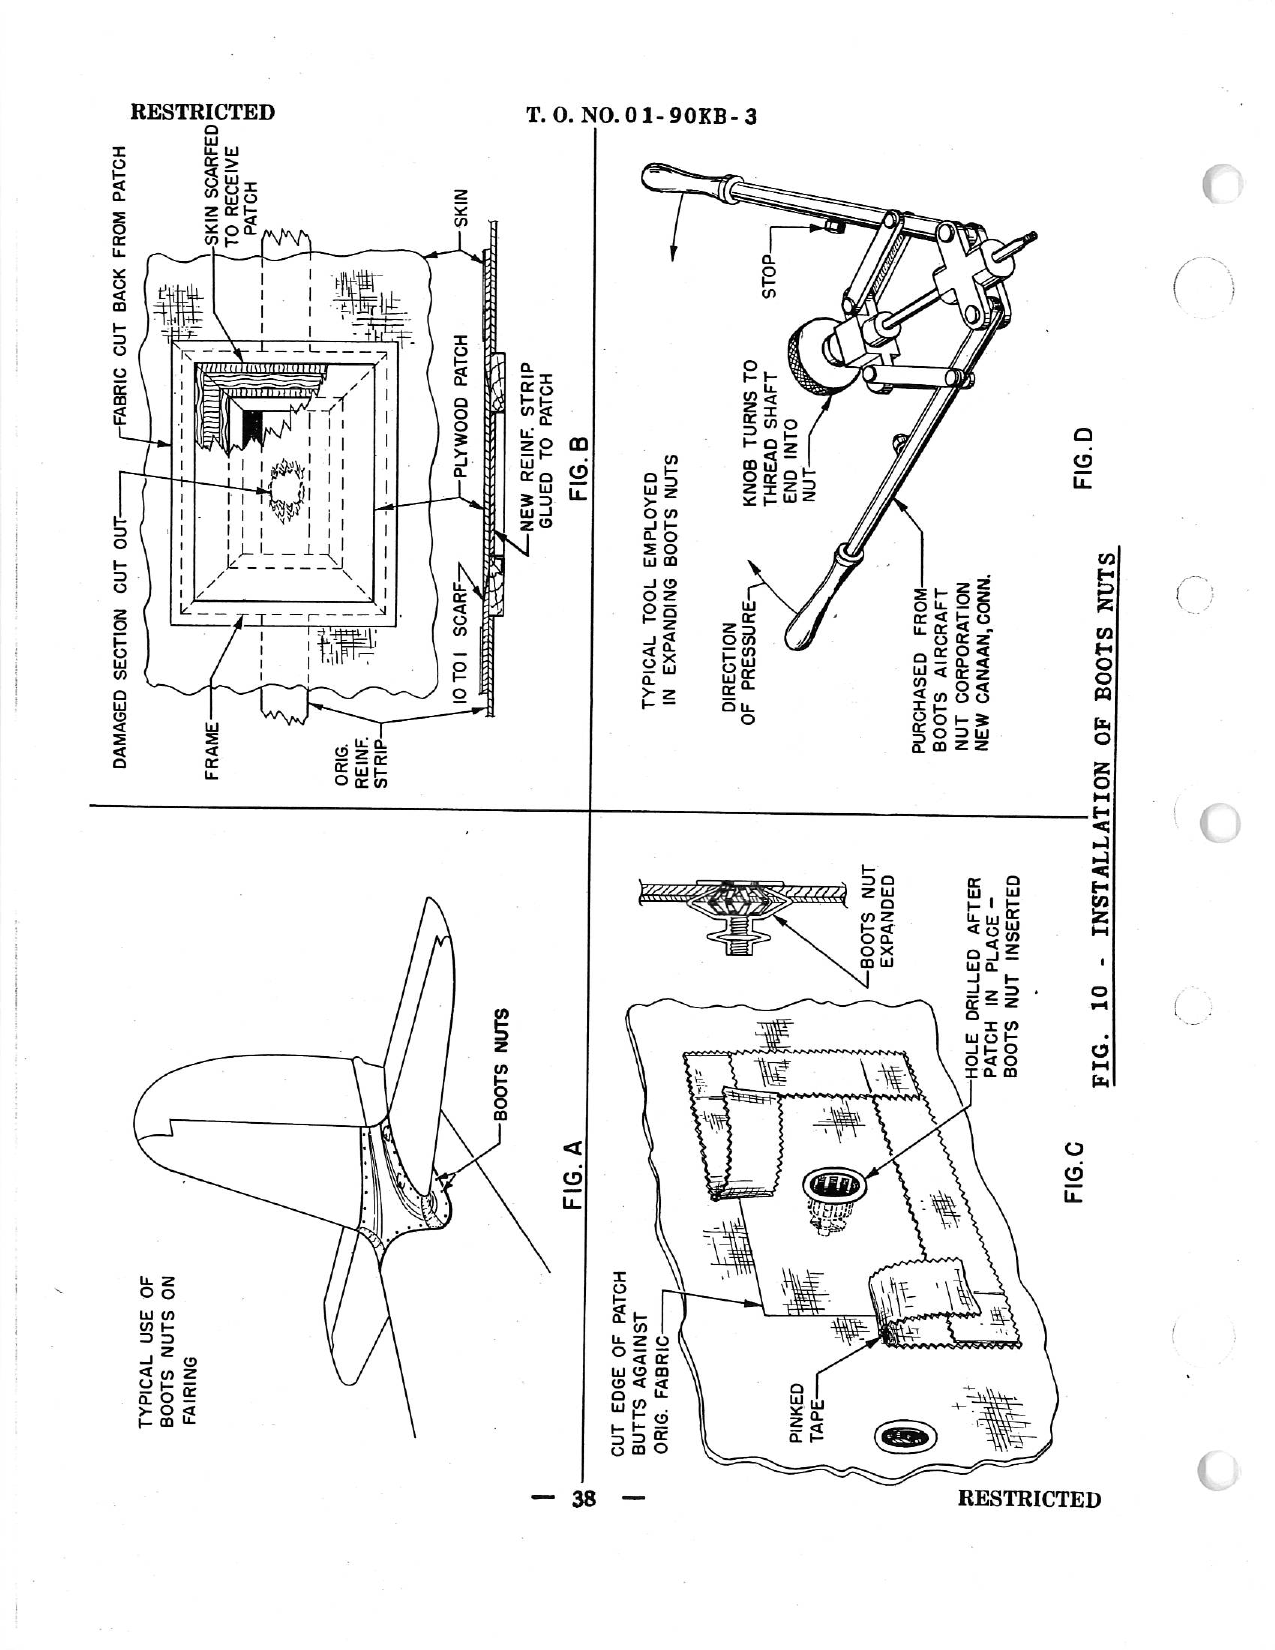 Sample page 40 from AirCorps Library document: Handbook of Overhaul Instructions: AT-10